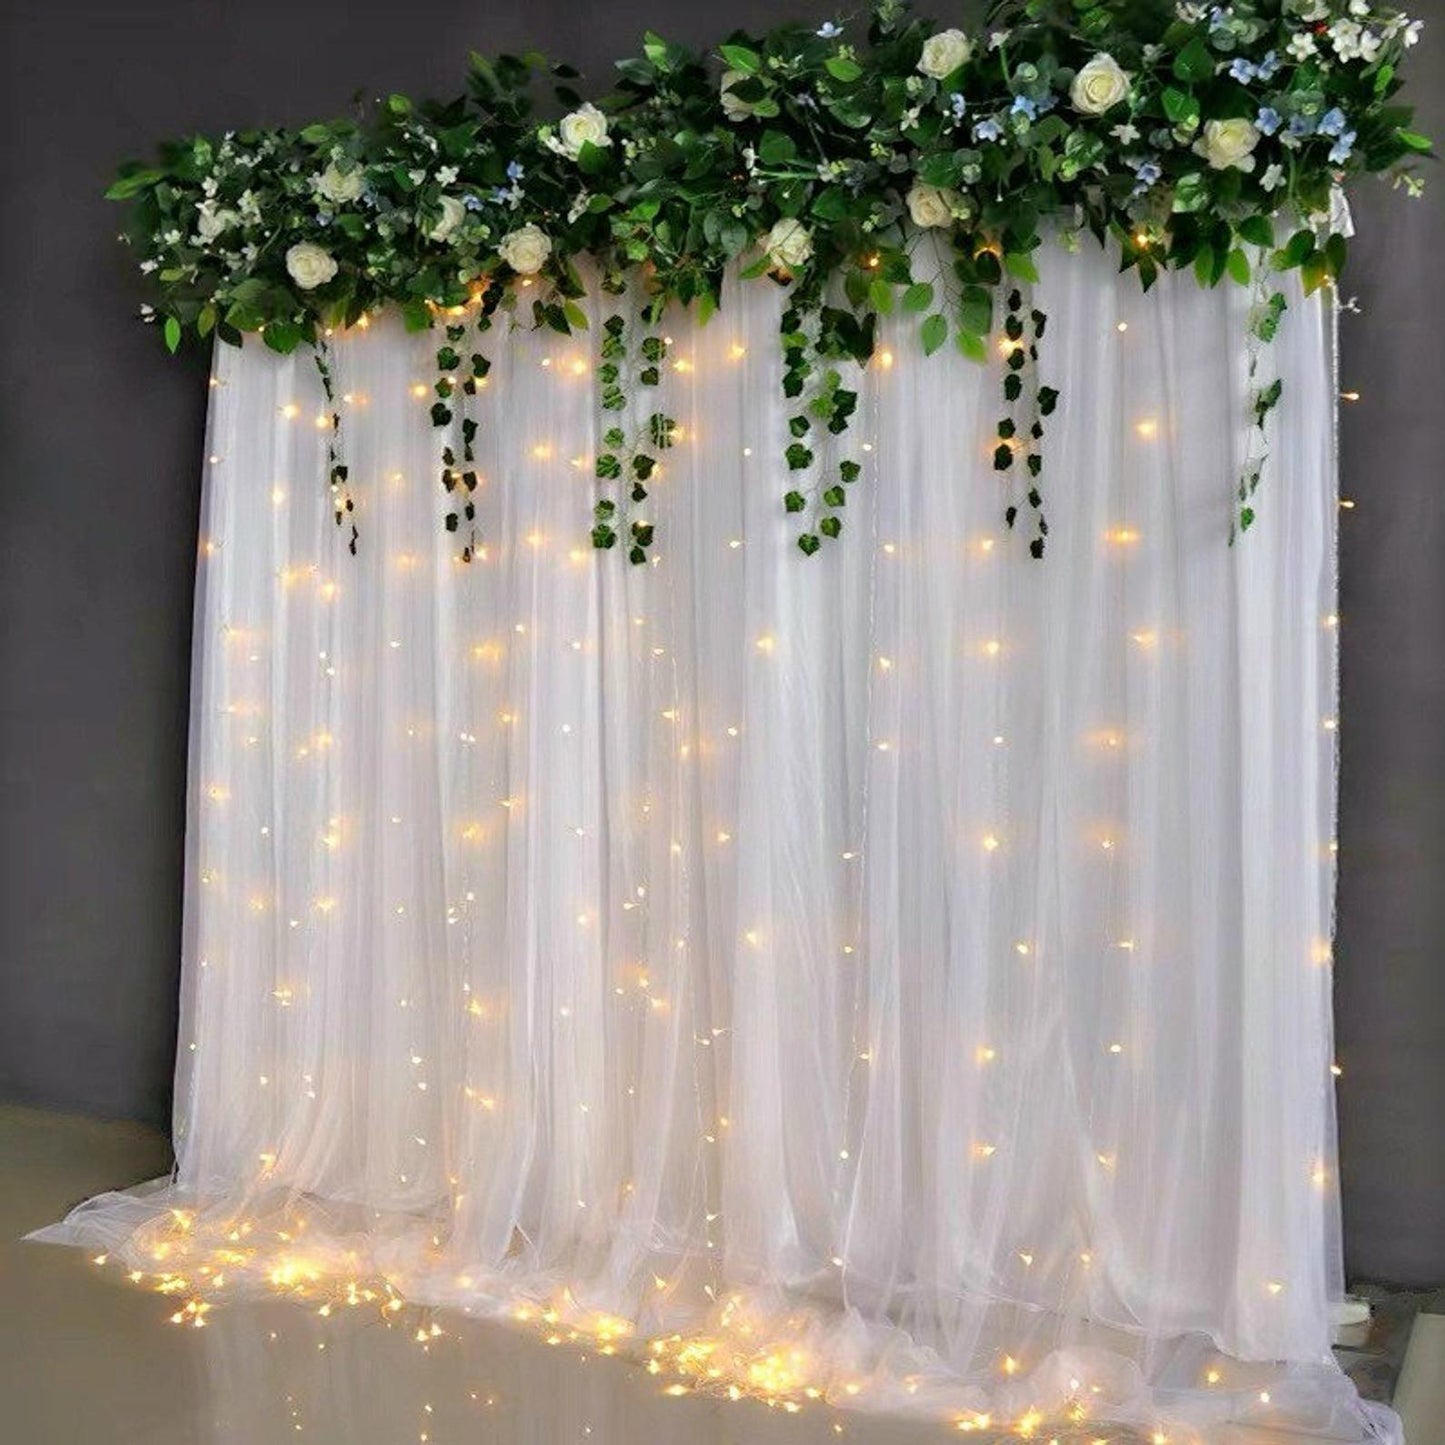 Window Curtain Lights,Fairy String Lights, Firefly Lights for Wall Decorations